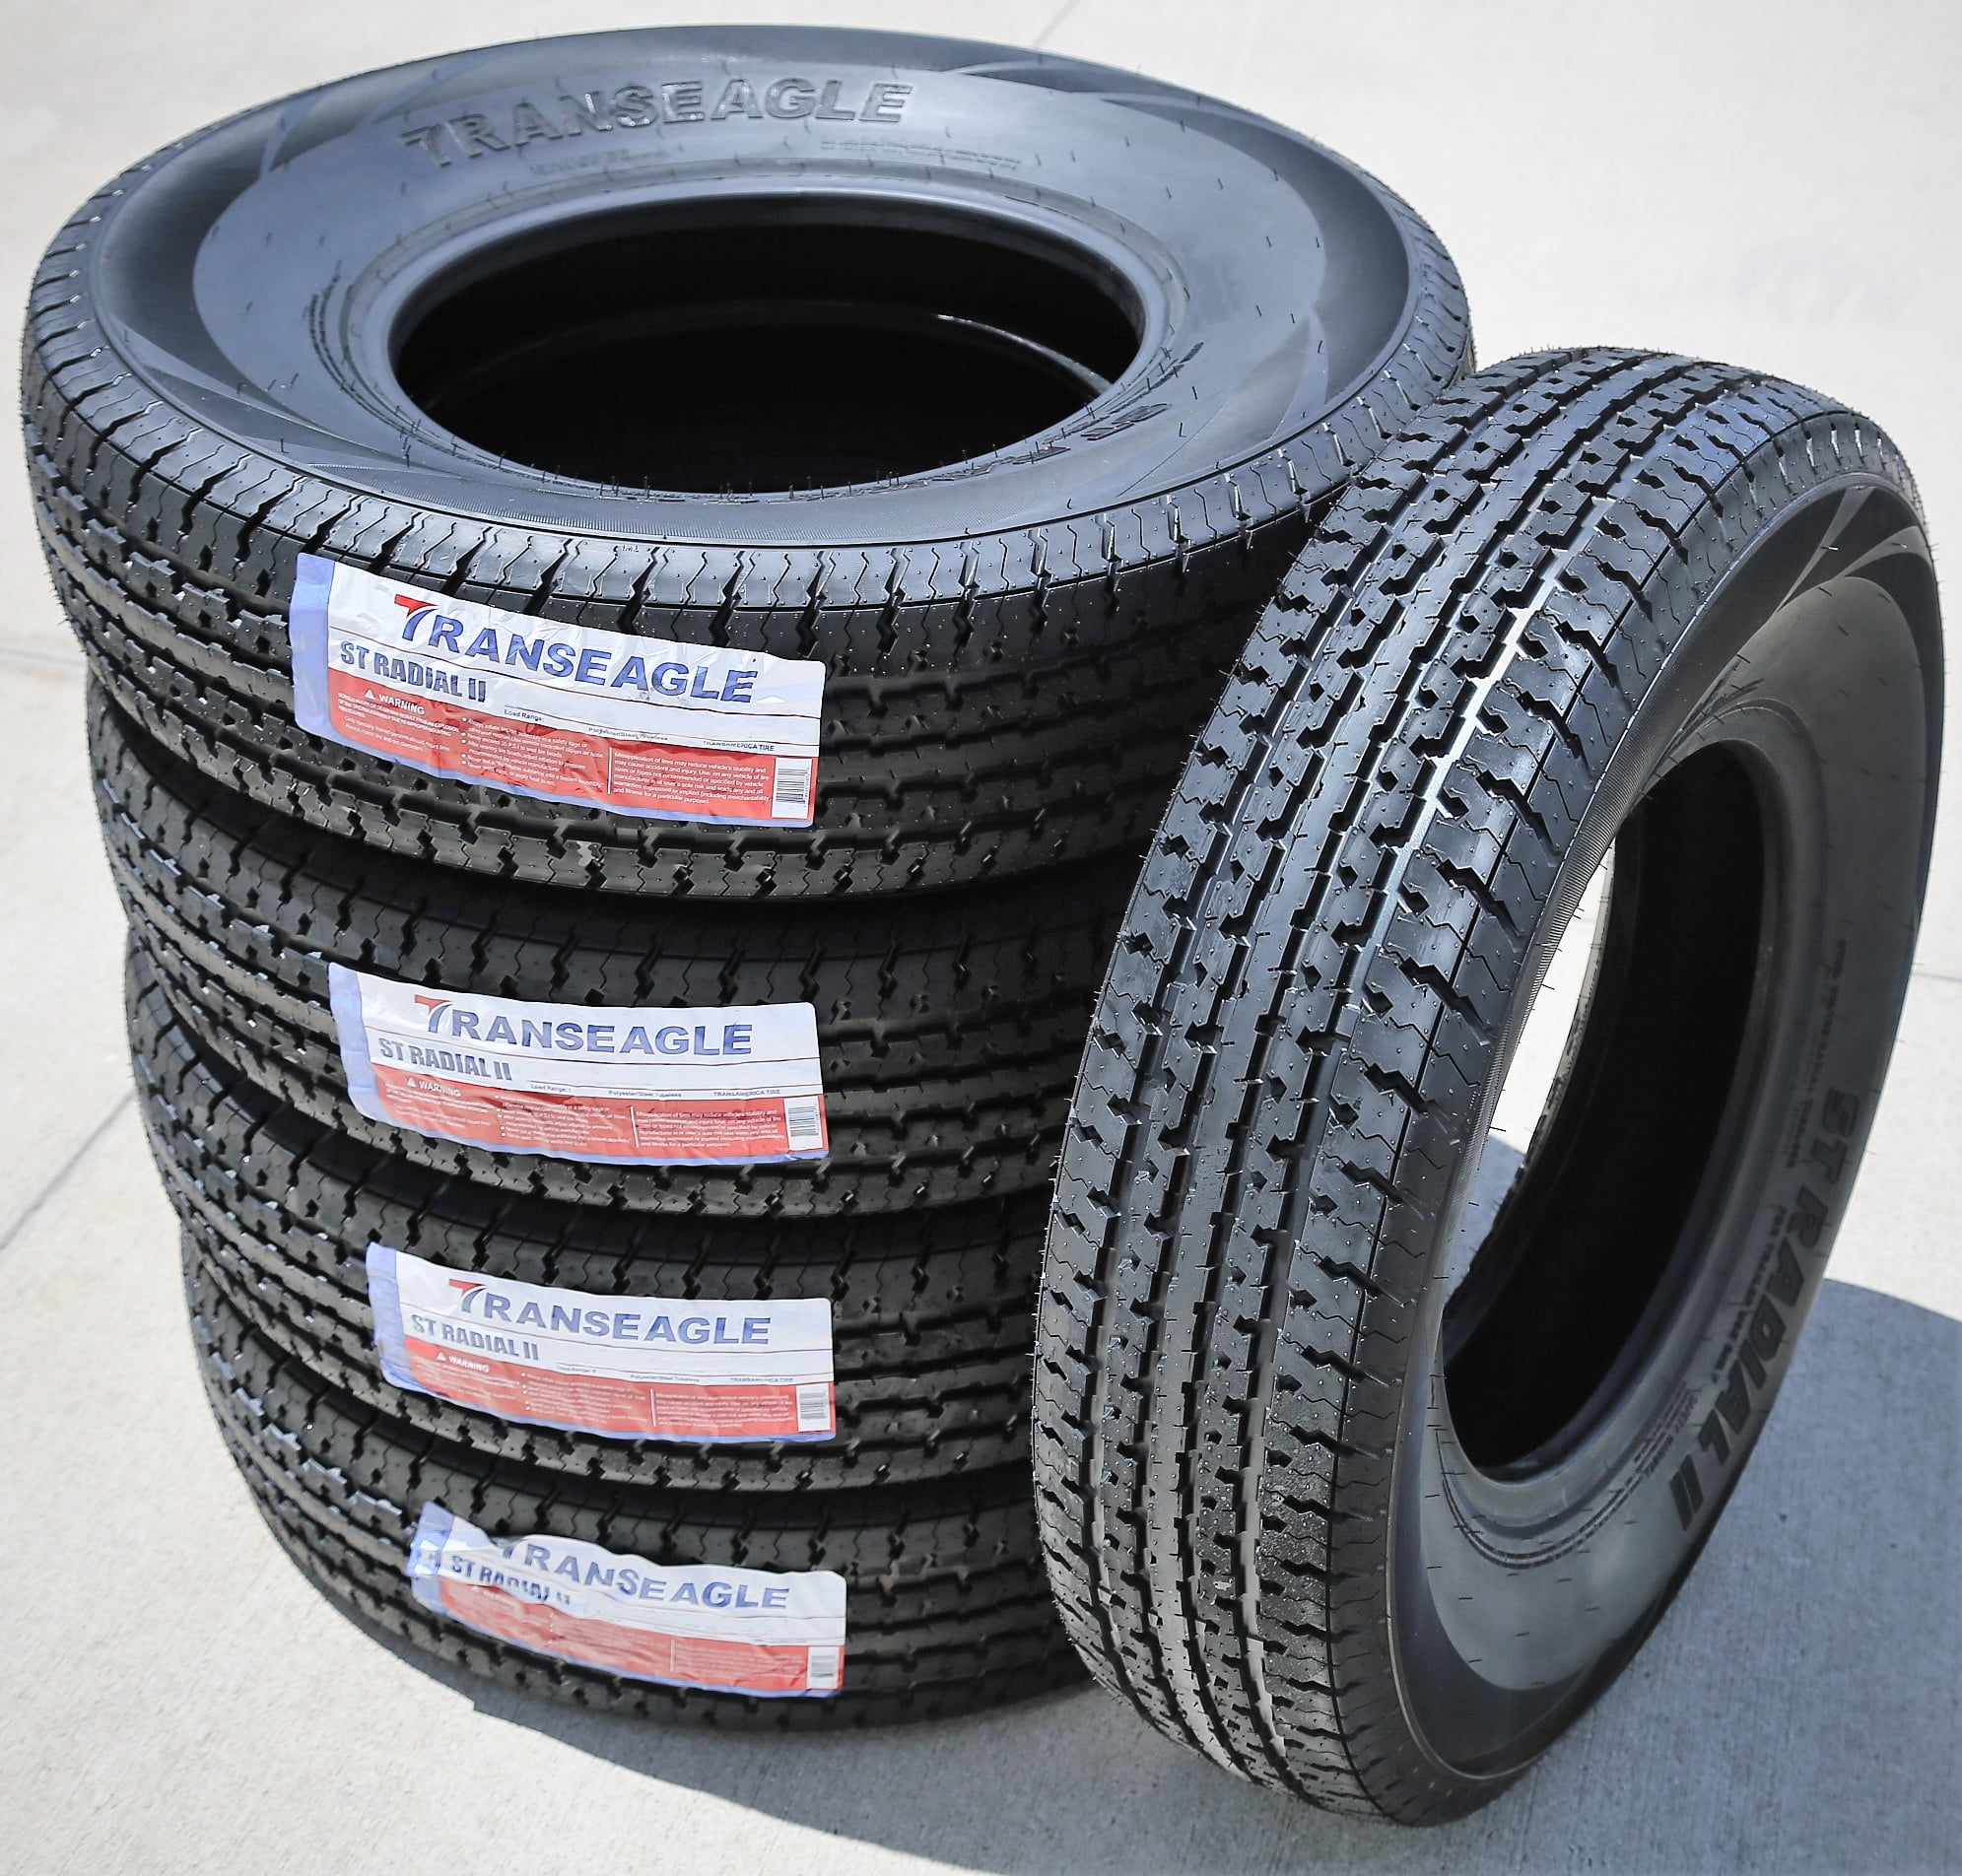 Transeagle ST Radial II Trailer Tire - ST205/75R15 111L LRE 10PLY